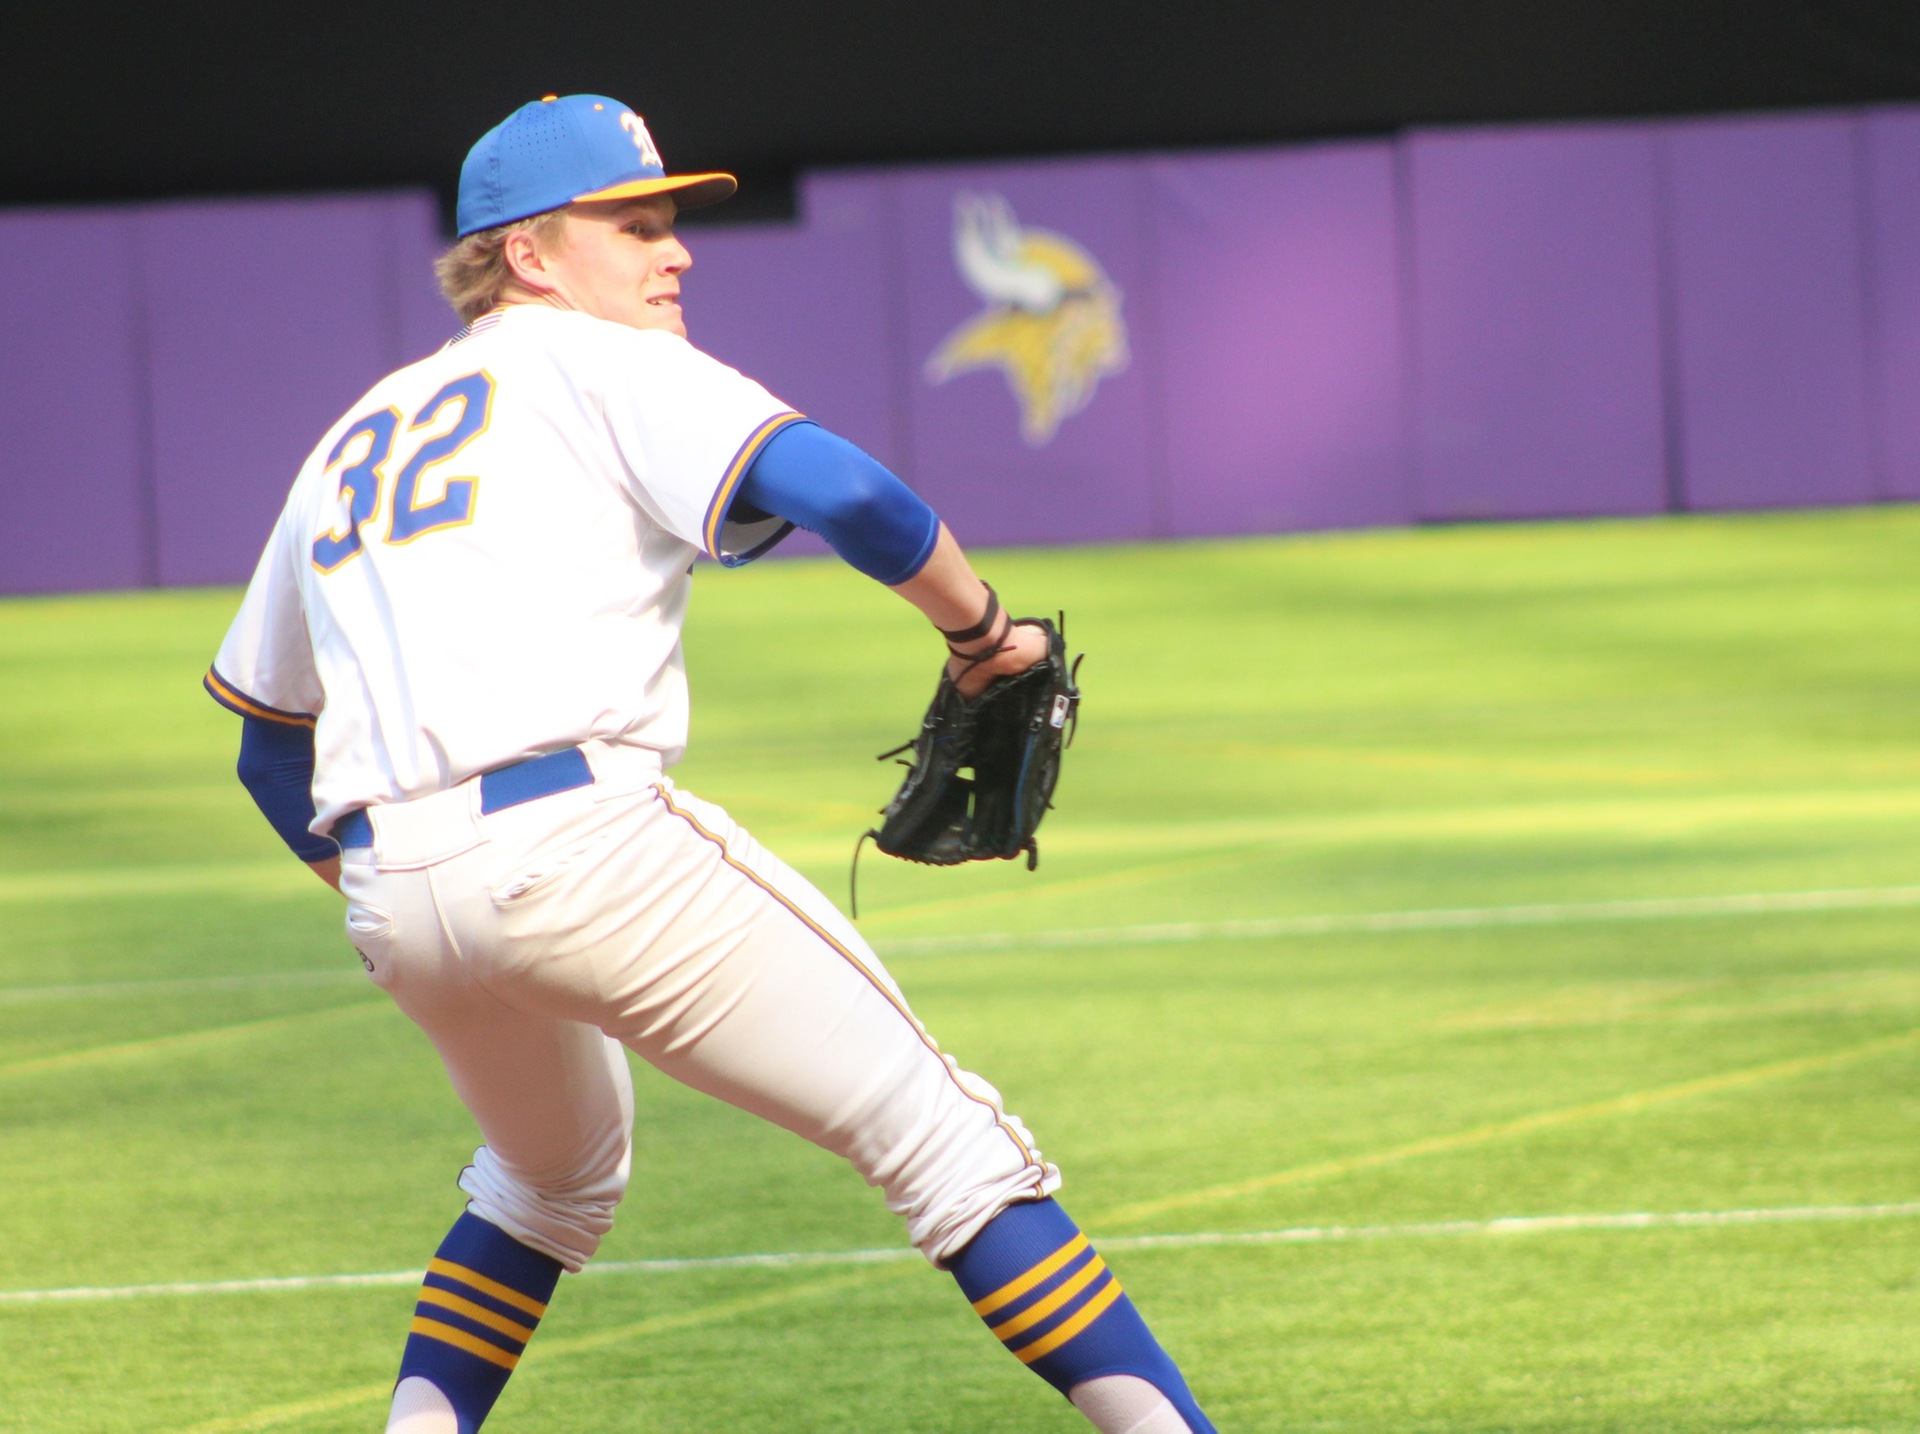 Former NIACC pitcher Connor Wietgrefe delivers a pitch for the Trojans in a game during the 2022 season.